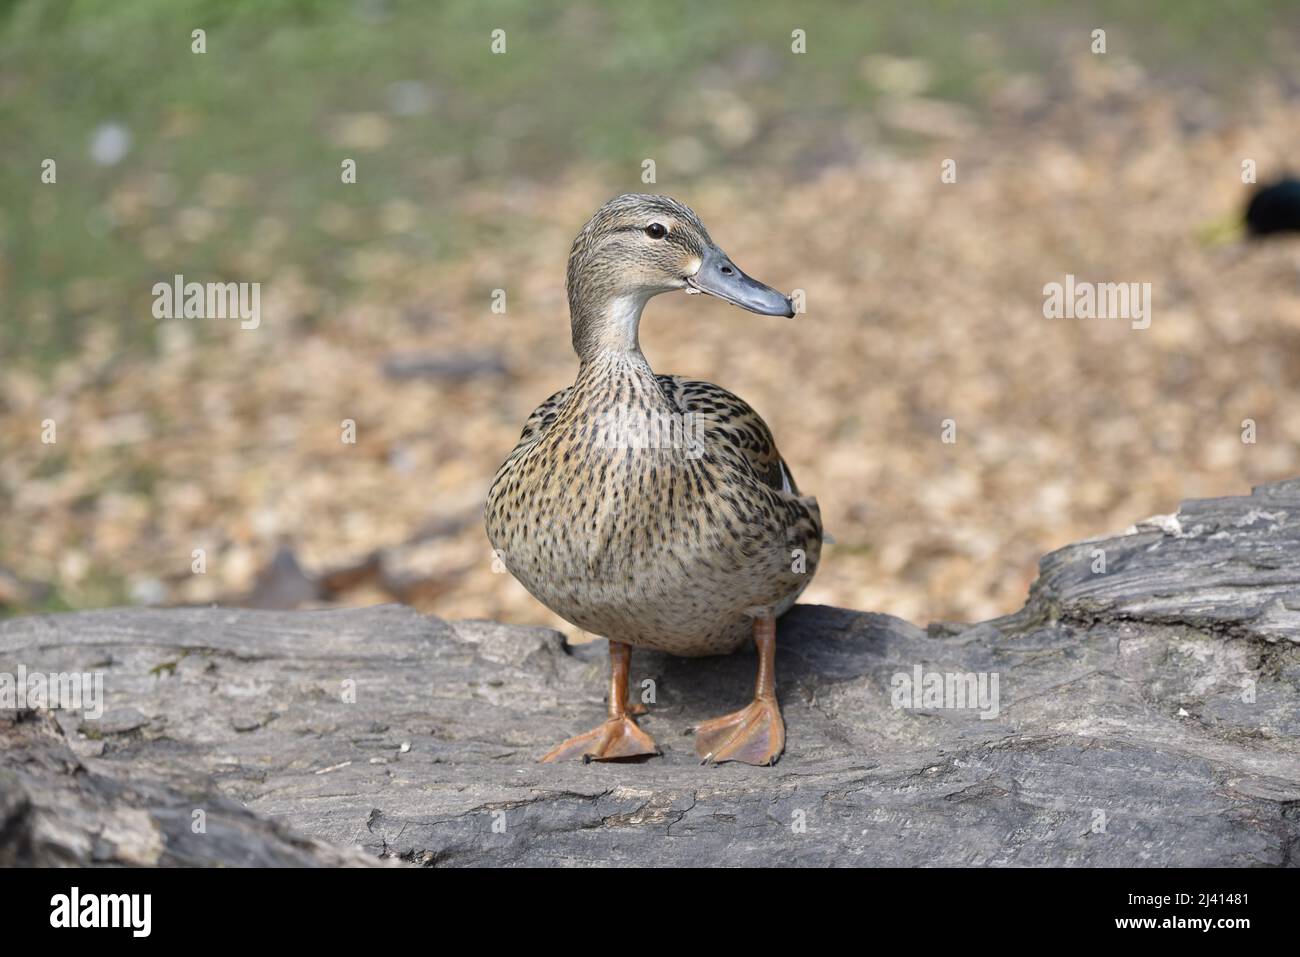 Close-Up Portrait of a Female Mallard Duck (Anas platyrhynchos) Facing Camera with Head Turned to Right of Image, Standing on a Horizontal Log in Sun Stock Photo